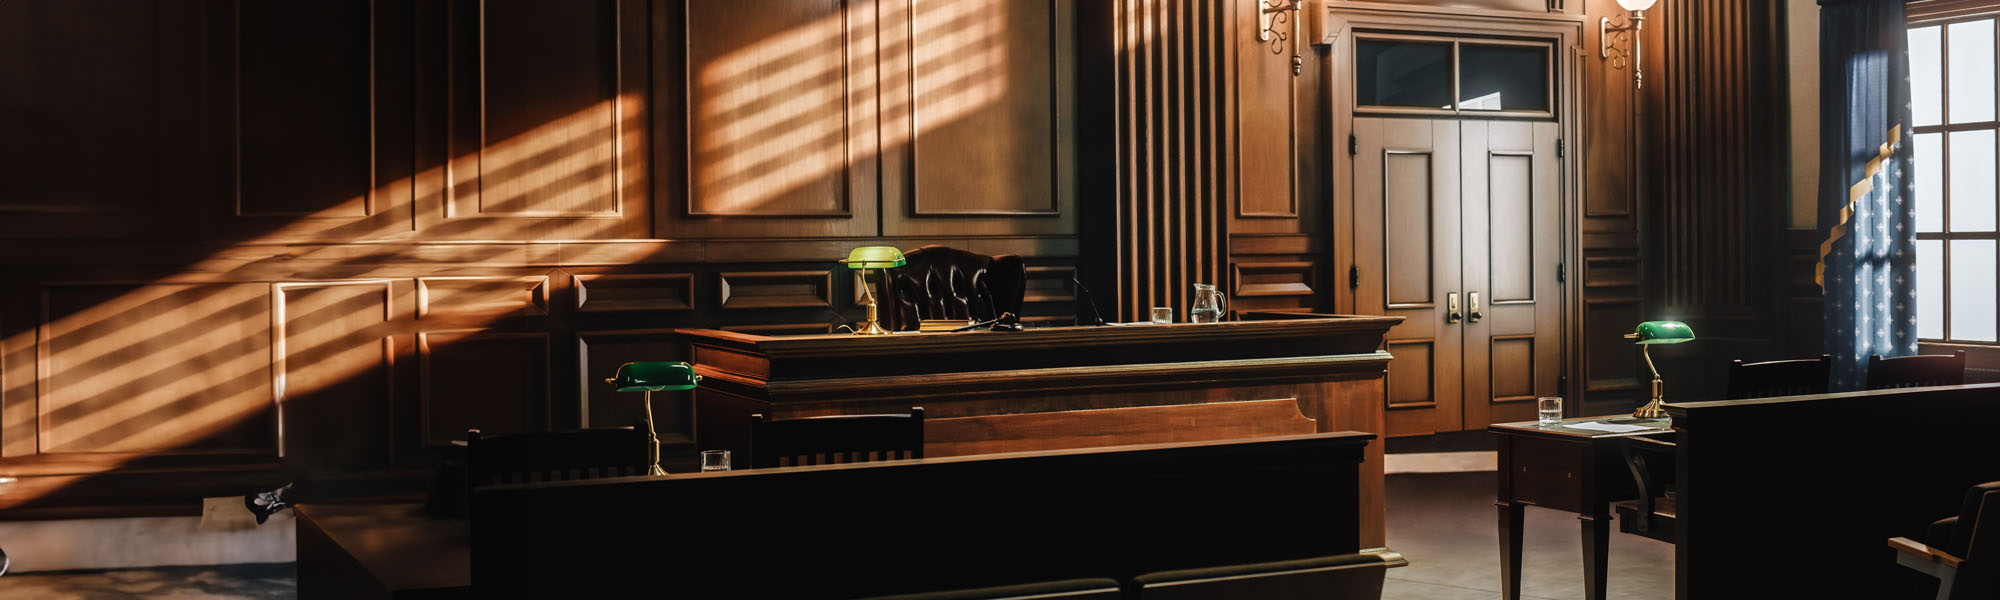 empty american style courtroom